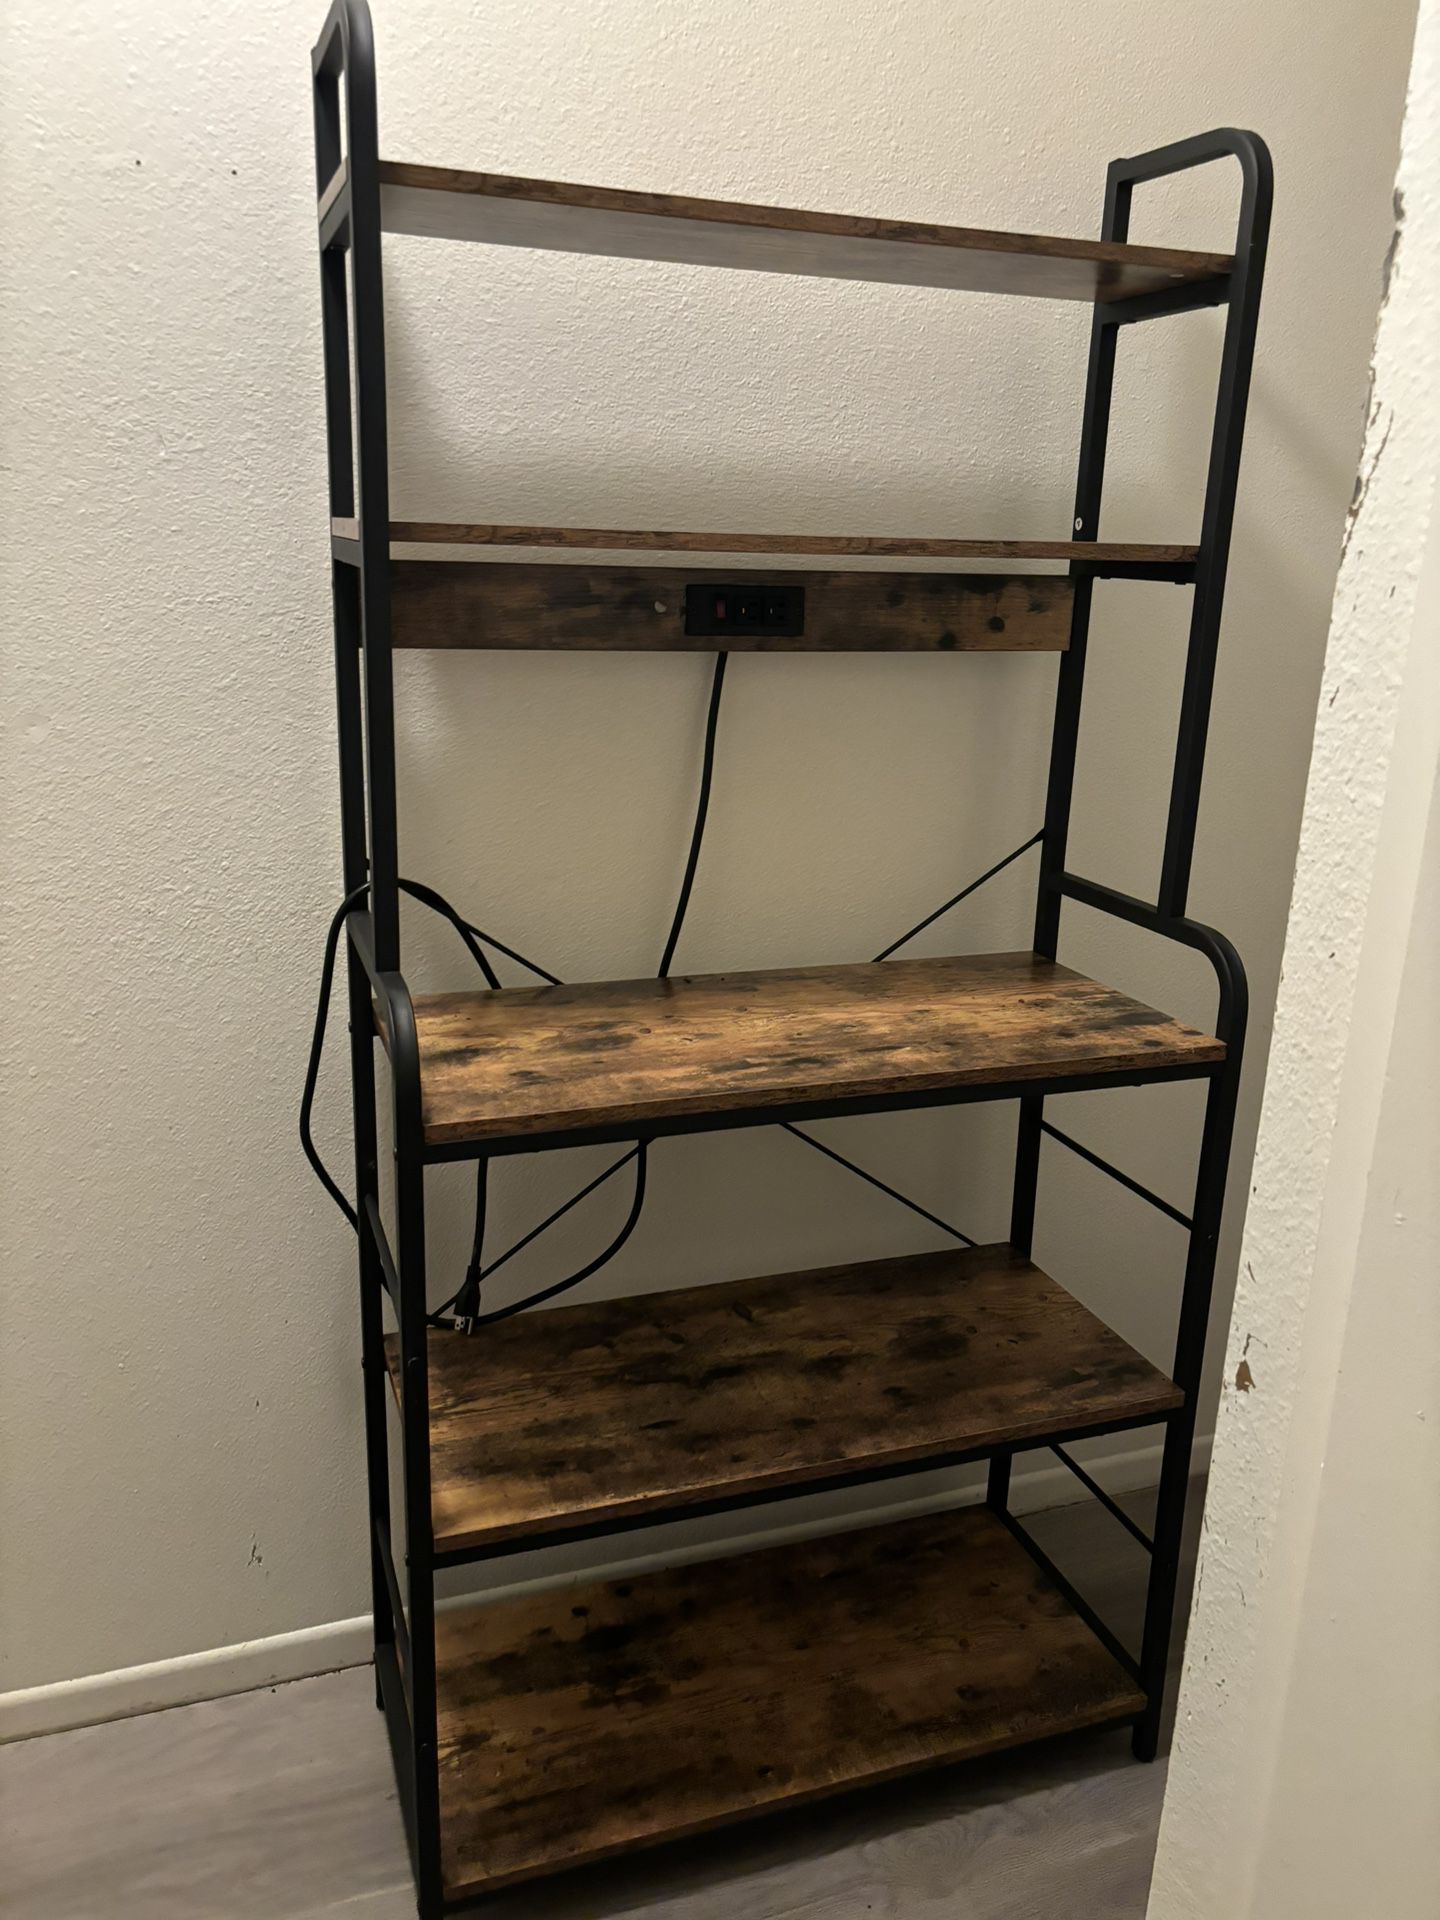 Kitchen Shelf Stand With Outlet 